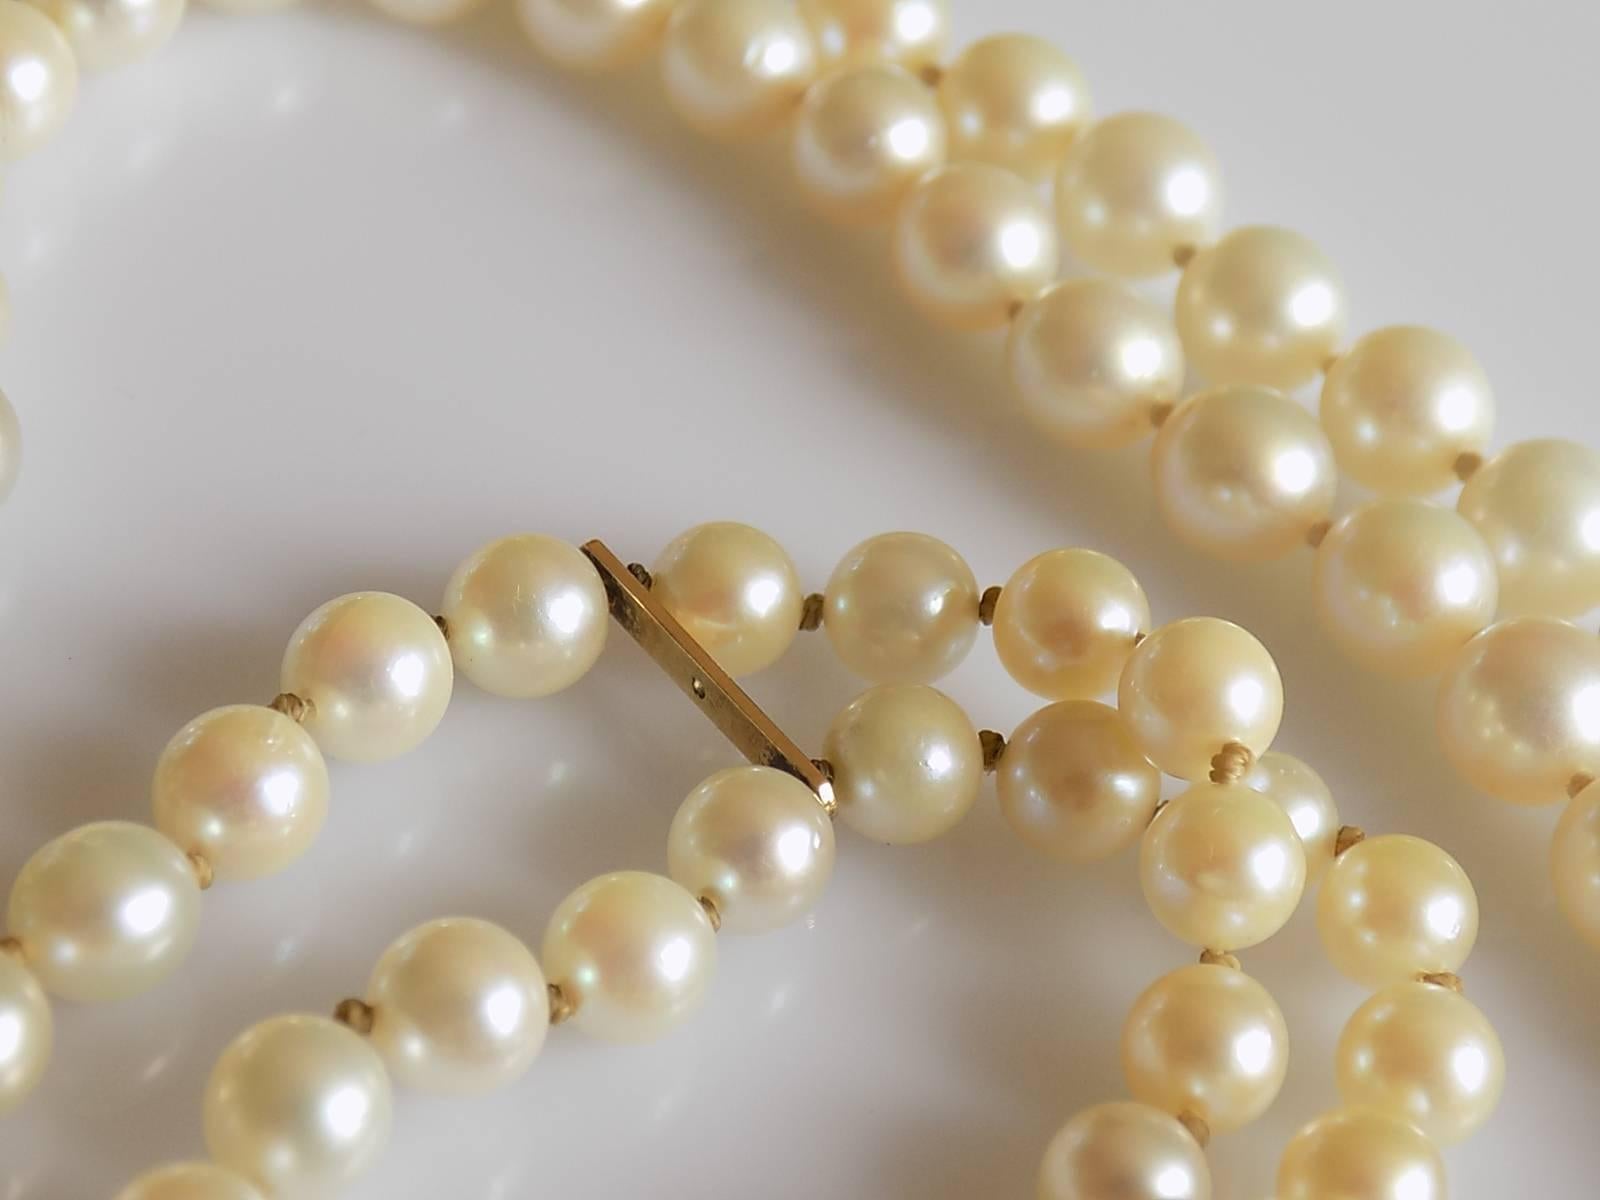 A Vintage from 1900 to1950s Two row Cultured Pearl necklace and bracelet Set. Both pieces on 9 carat yellow gold clasps with a faceted natural oval Citrine in the middle and surrounded by eight split pearls. English origin.
Necklace: Total length of